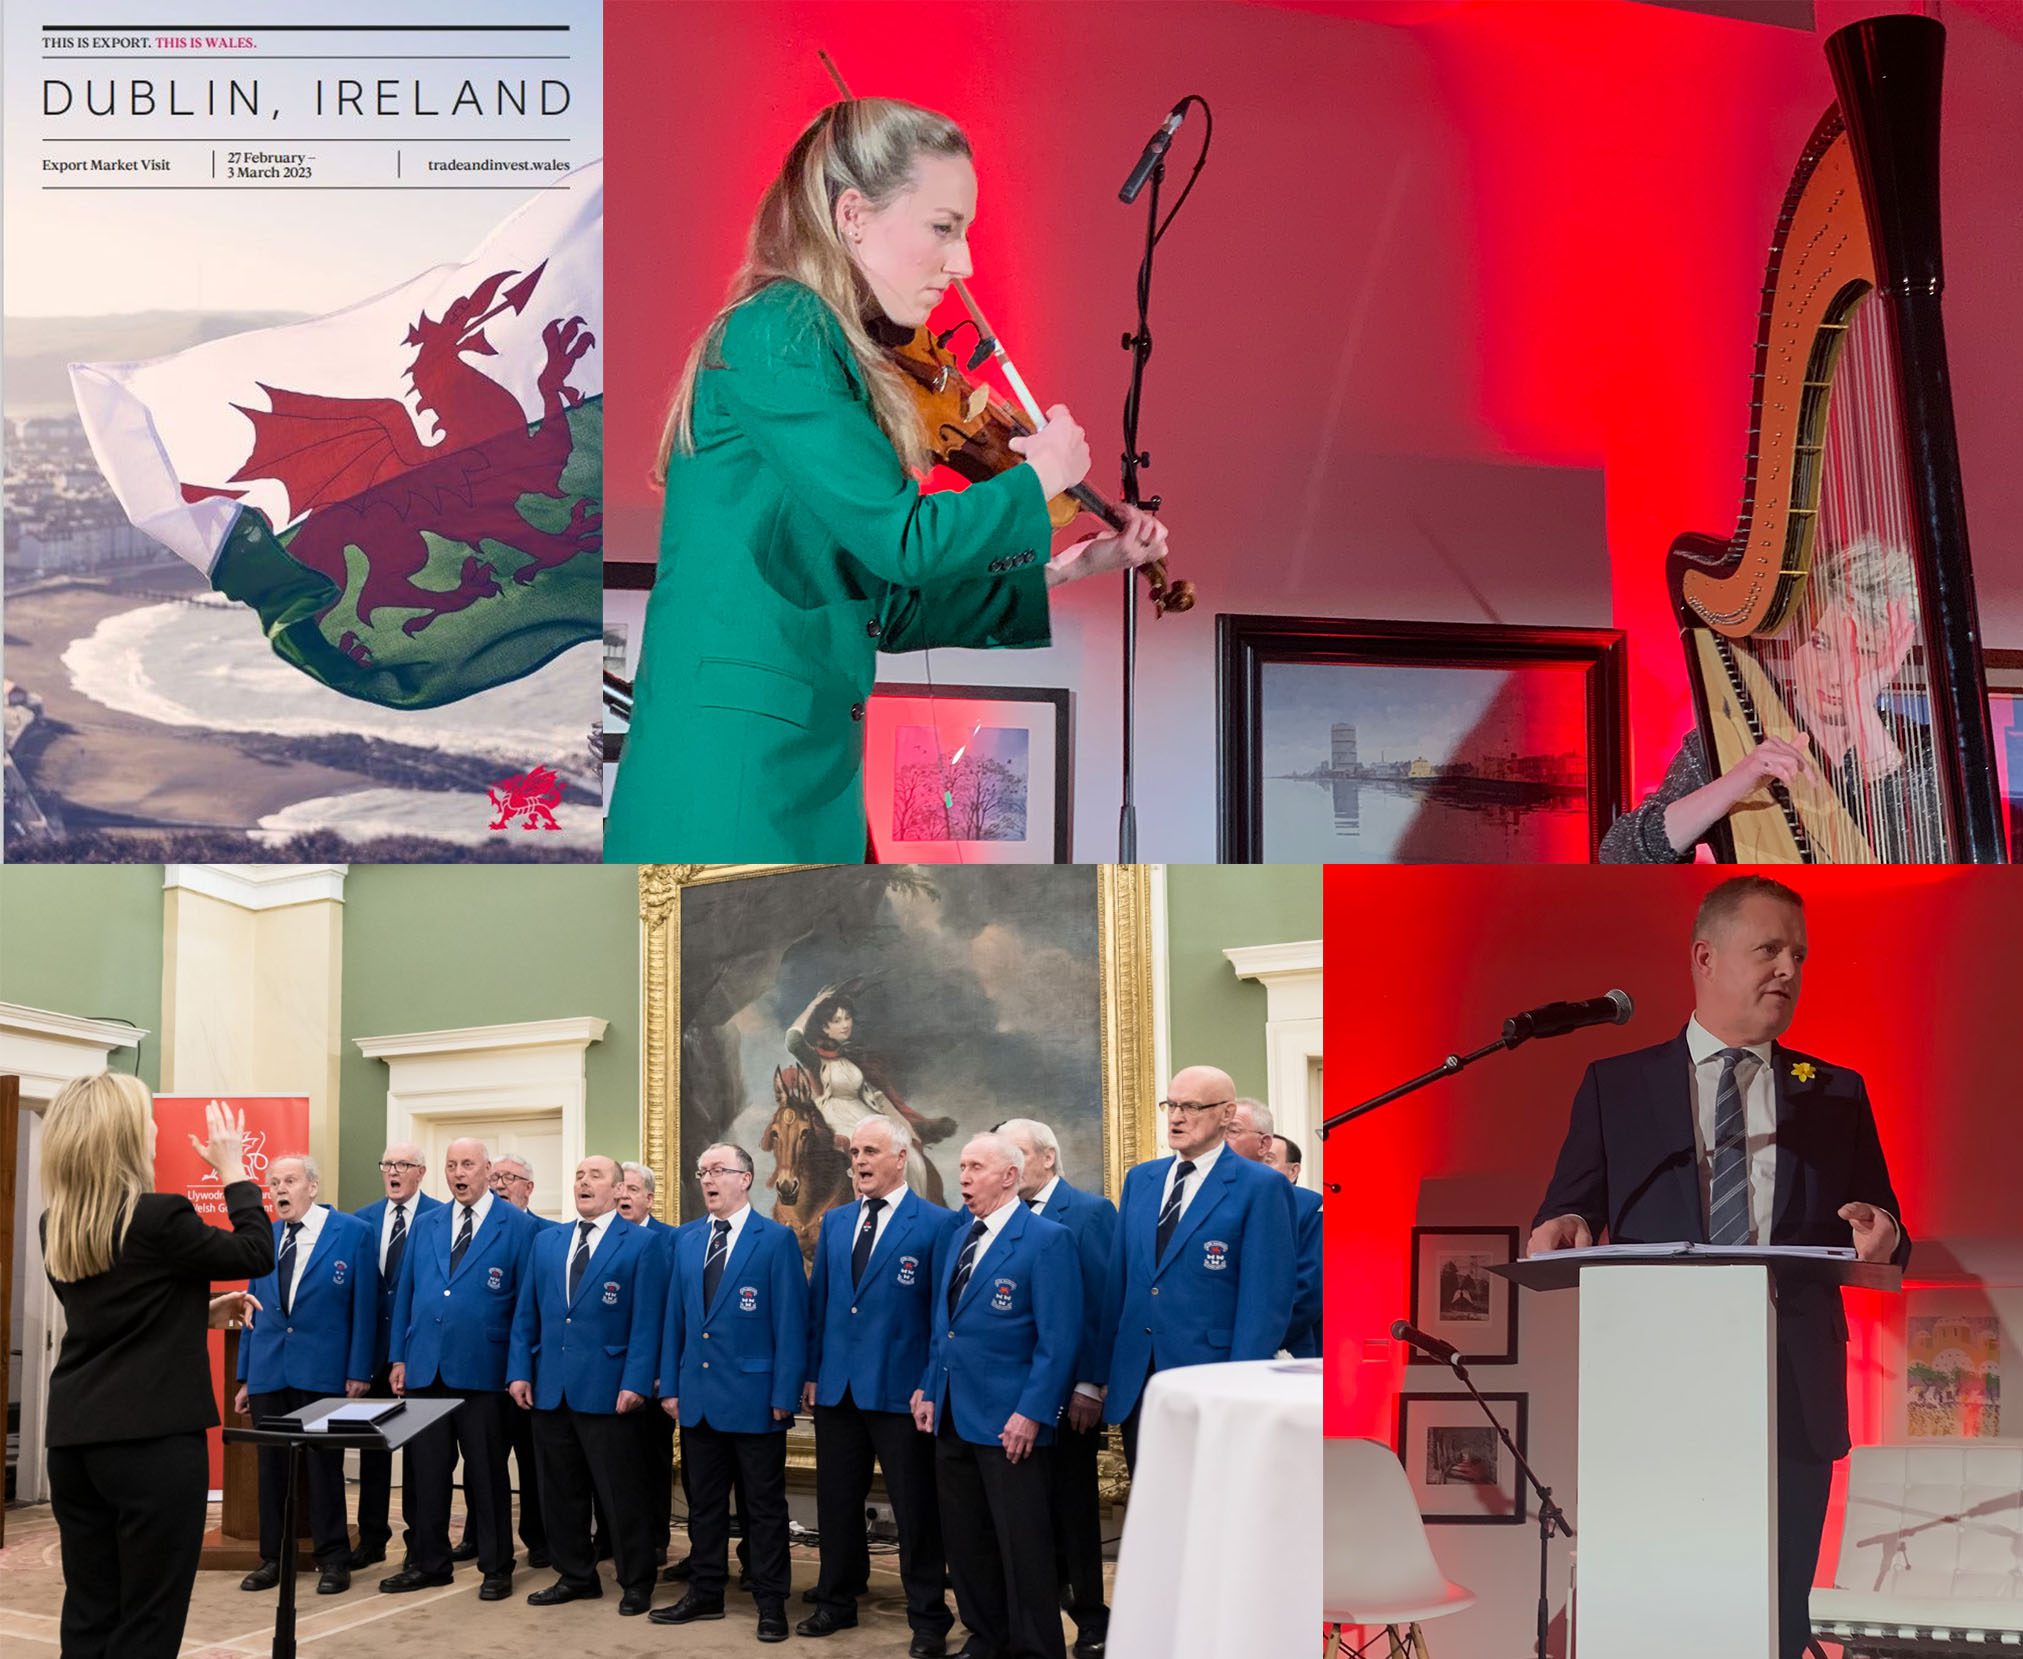 A seletion of images from the Welsh trade mission to ireland; including a choir band and two women playing a violin and a harp